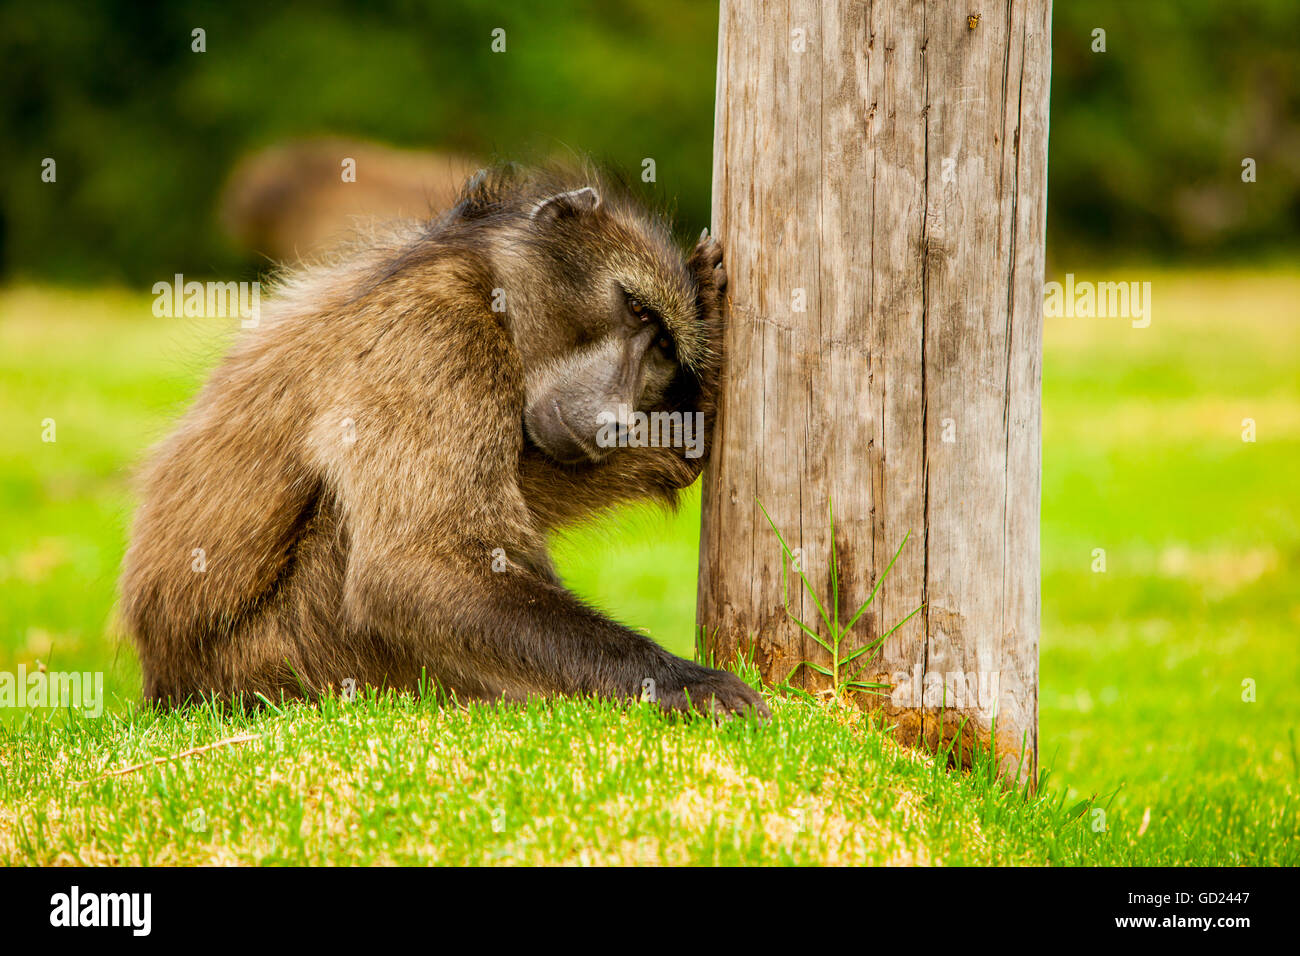 Baboon resting, Johannesburg, South Africa, Africa Stock Photo